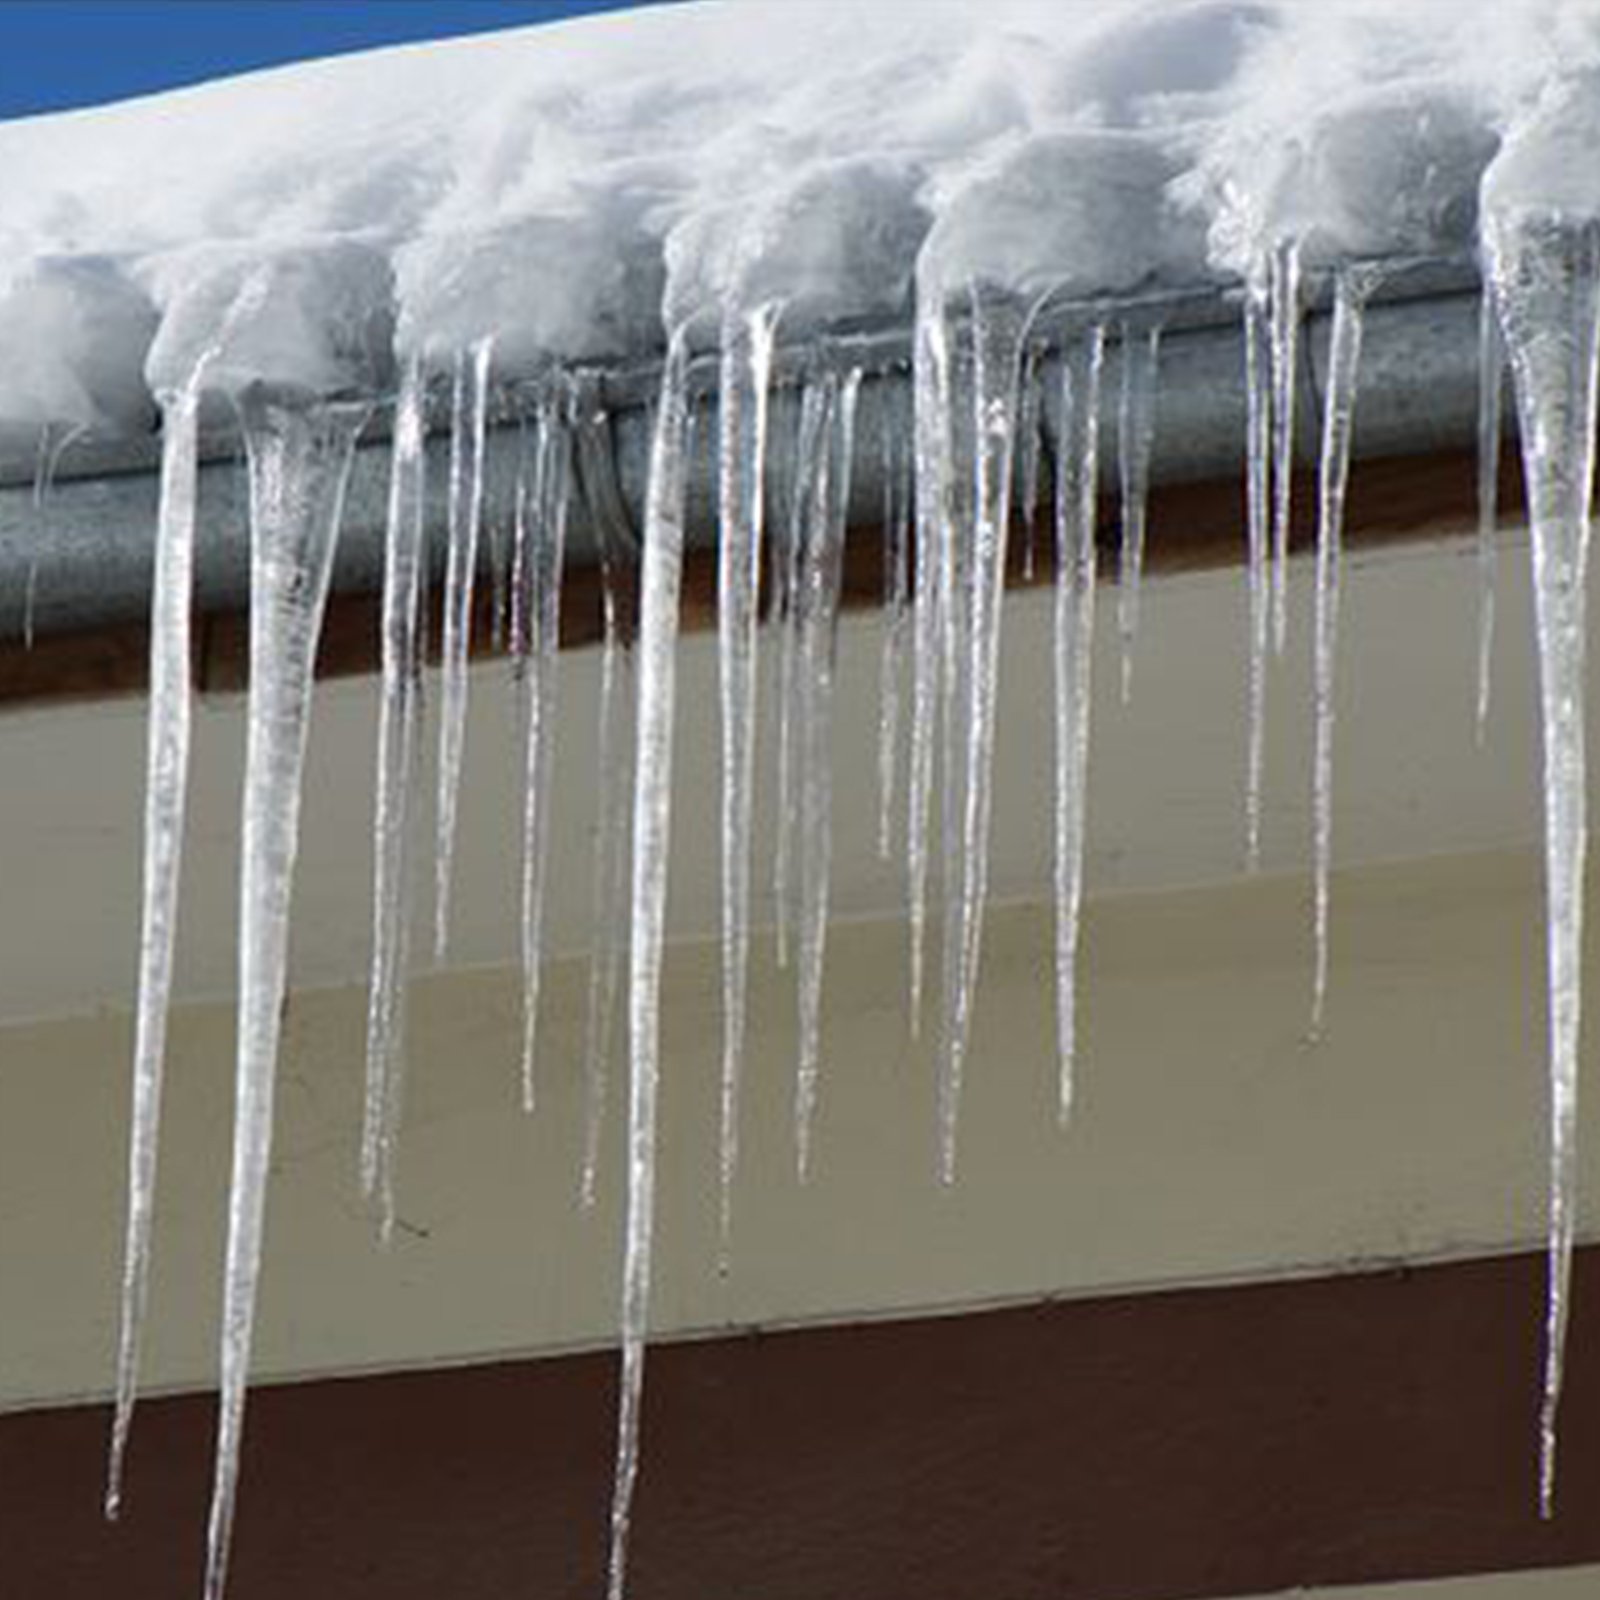 Beware of excessive snow load - heating cables can help